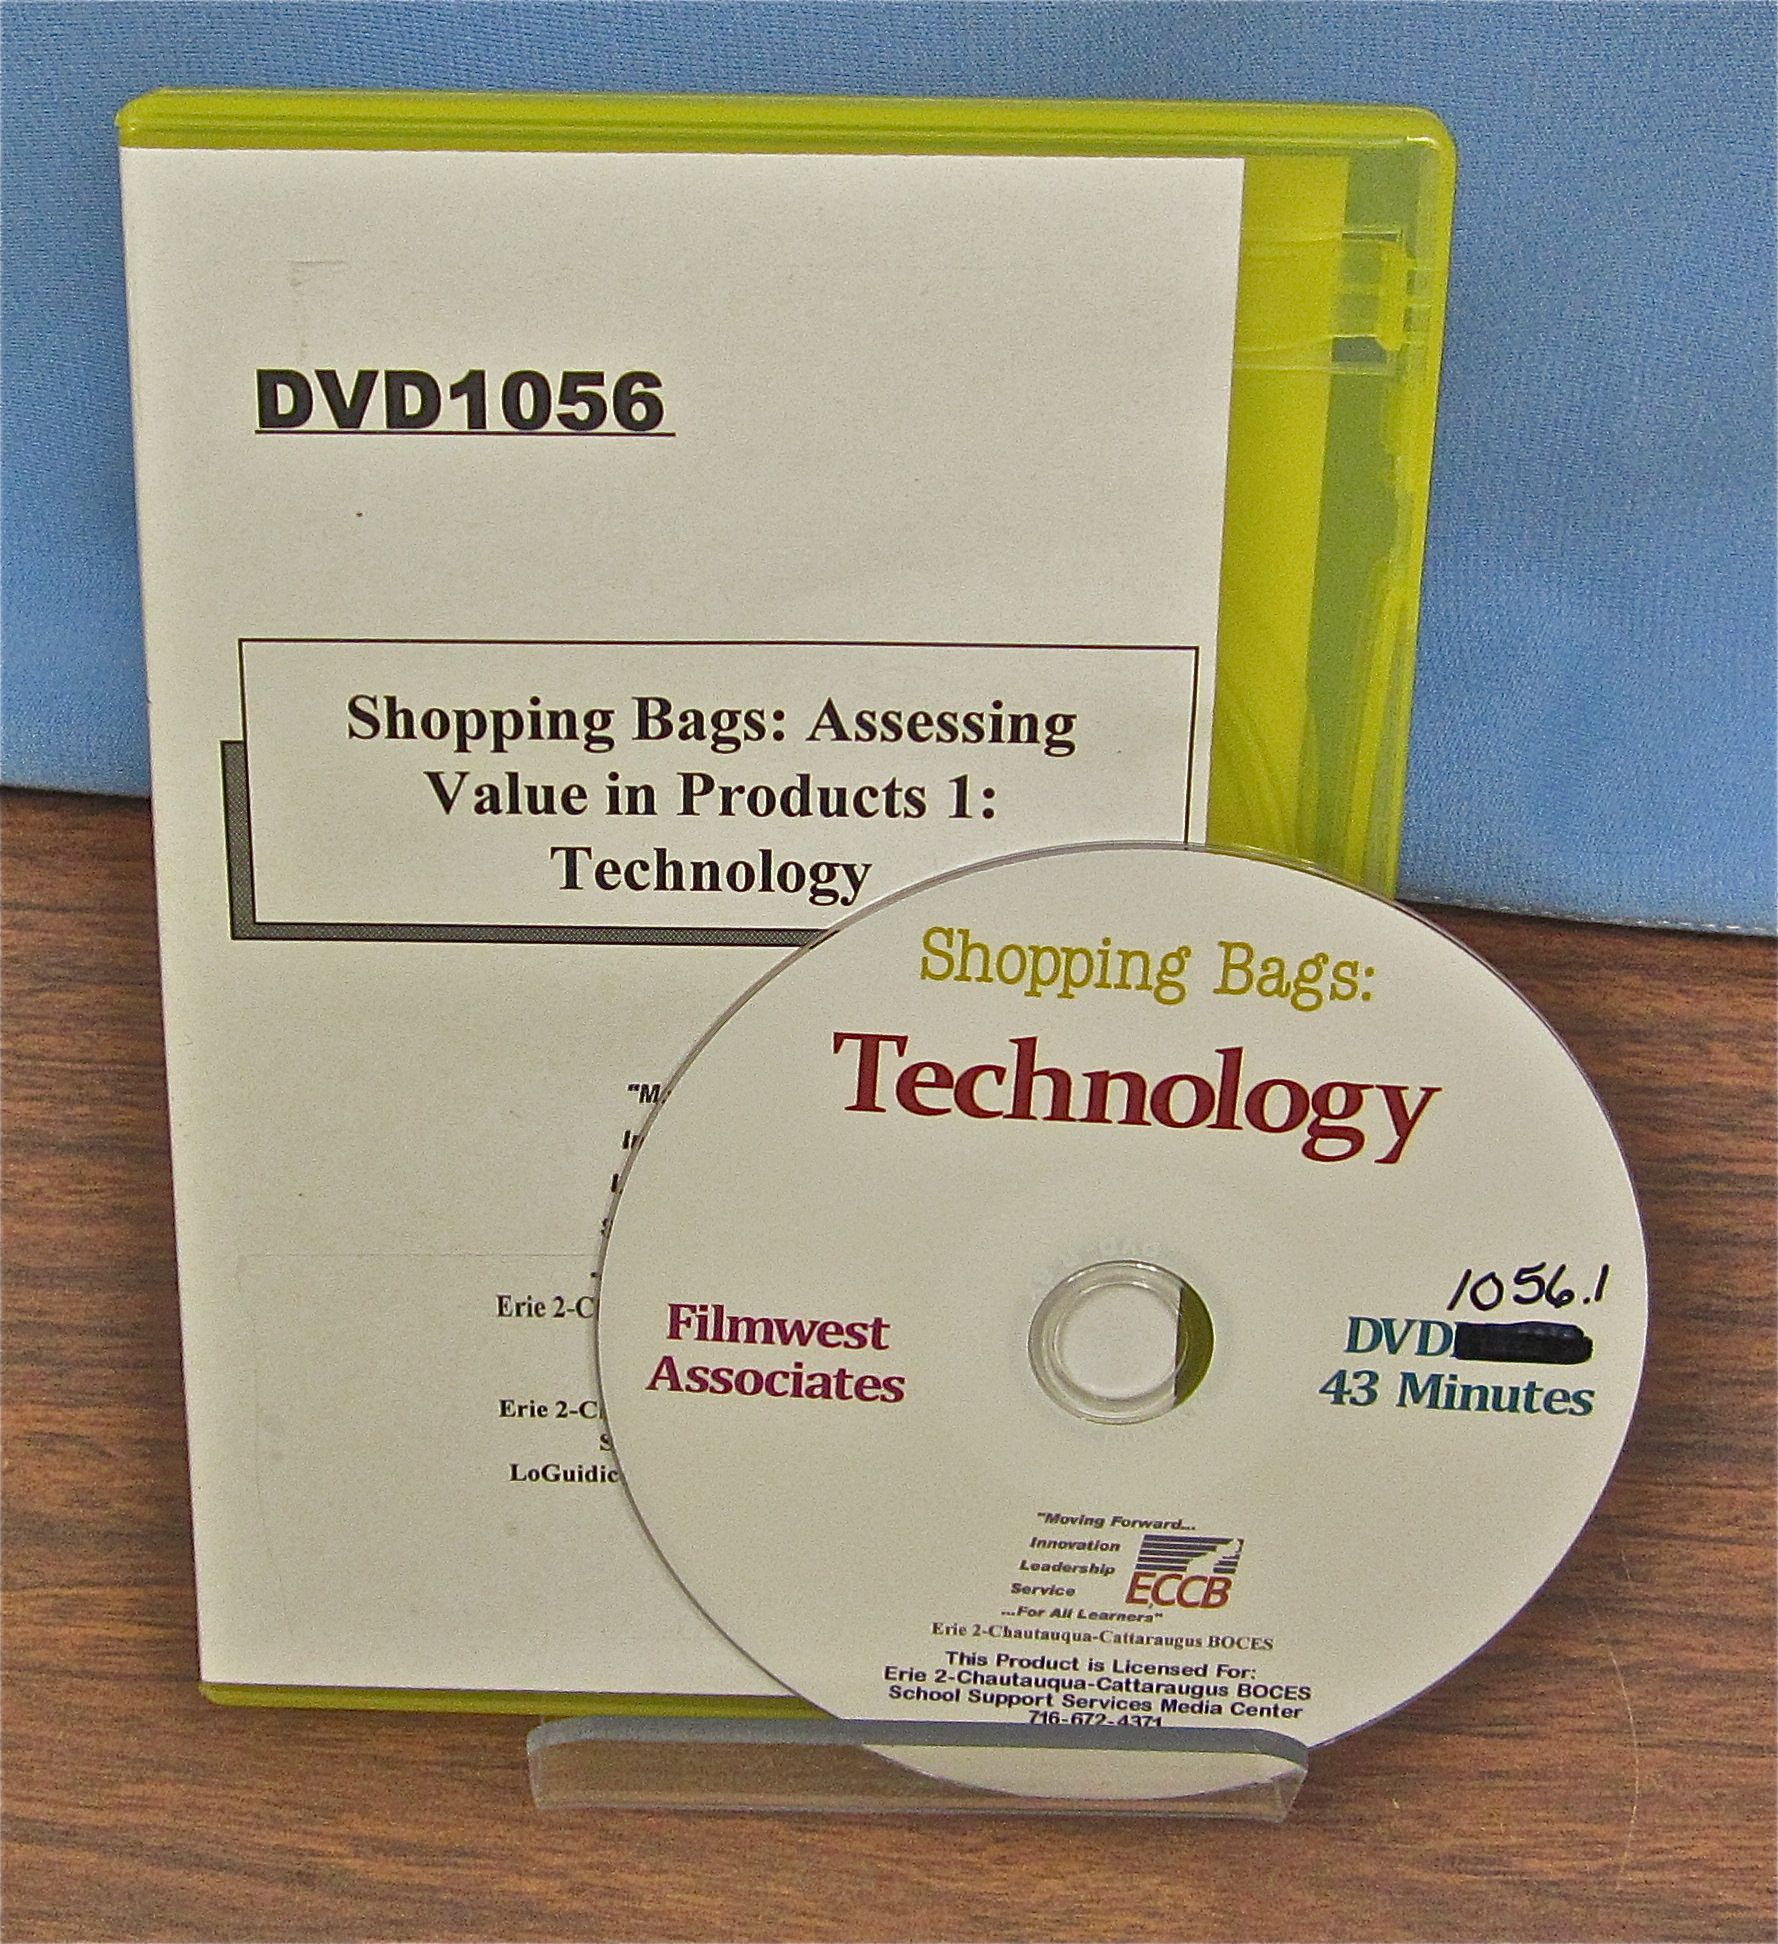 Shopping Bags: Assessing Value in Products 1: Technology